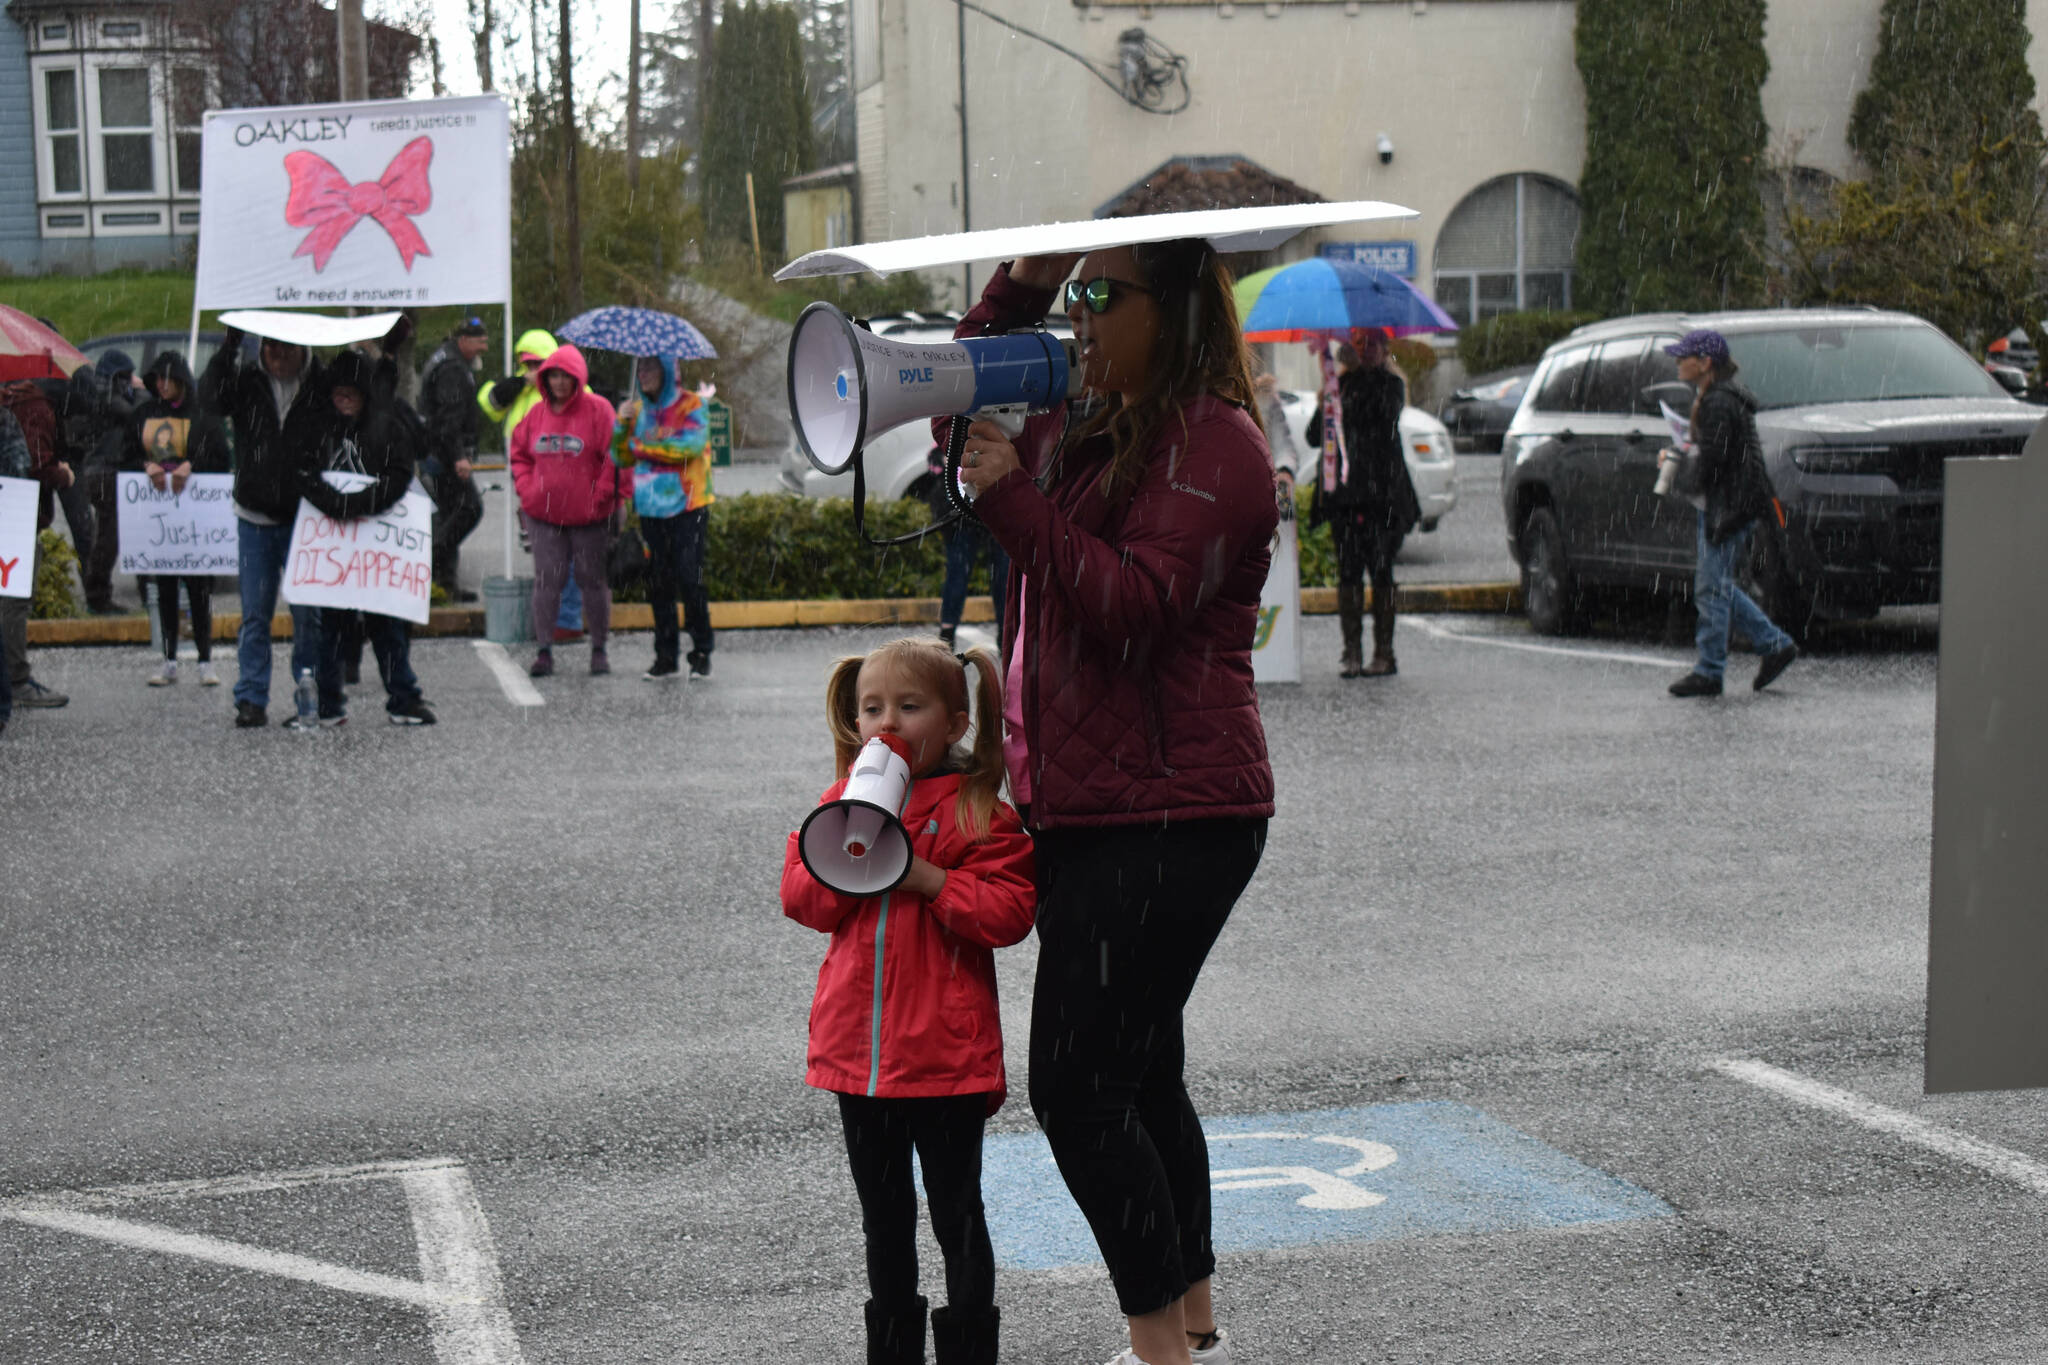 Five-year old Aubrey Wolfe shouts “Where is Oakley?” into her bullhorn beside her mother Jordan Wolfe, at the Gathering for Oakley, on Saturday, April 9, outside the Grays Harbor County Jail, in Montesano. Oakley’s biological parents, Jordan Bowers and Andrew Carlson, are both inmates inside the jail. (Matthew N. Wells | The Daily World)